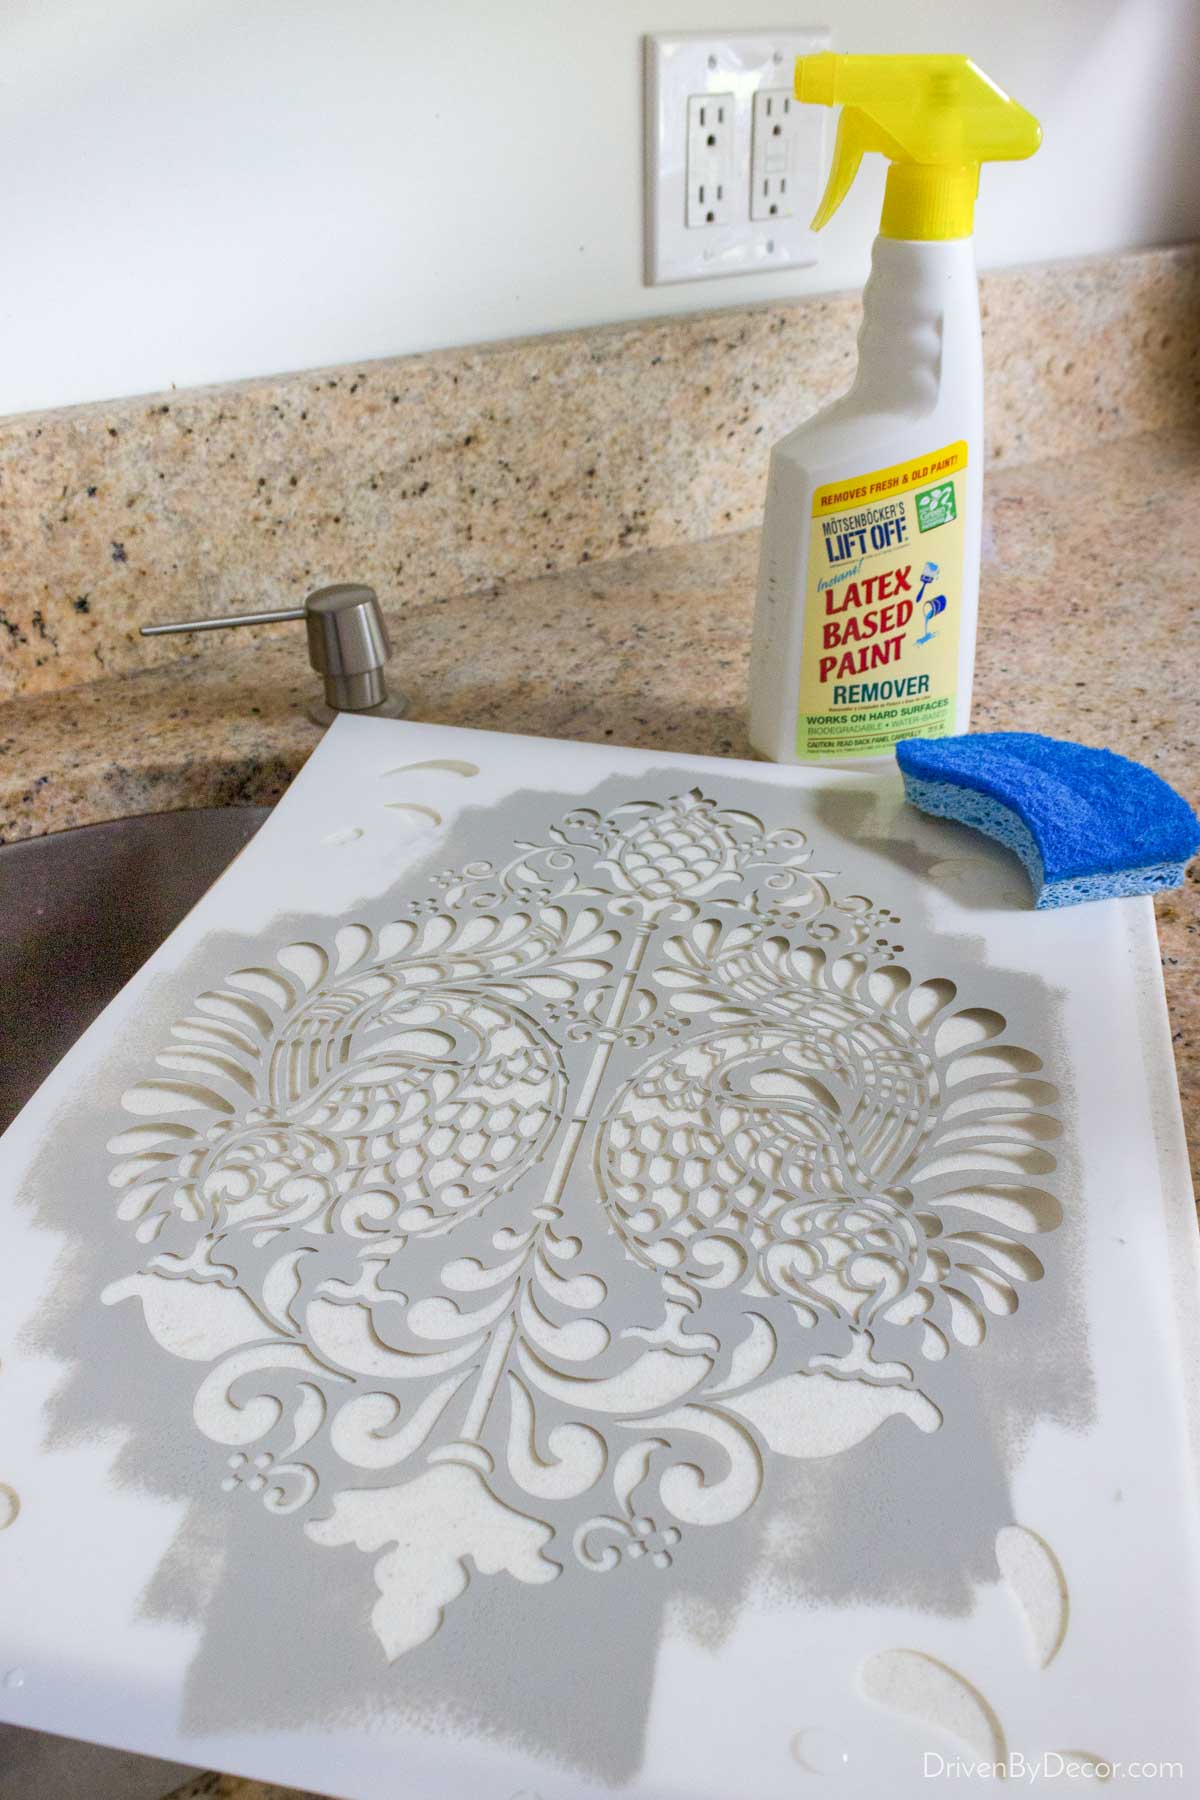 Cleaning a wall stencil with latex paint remover